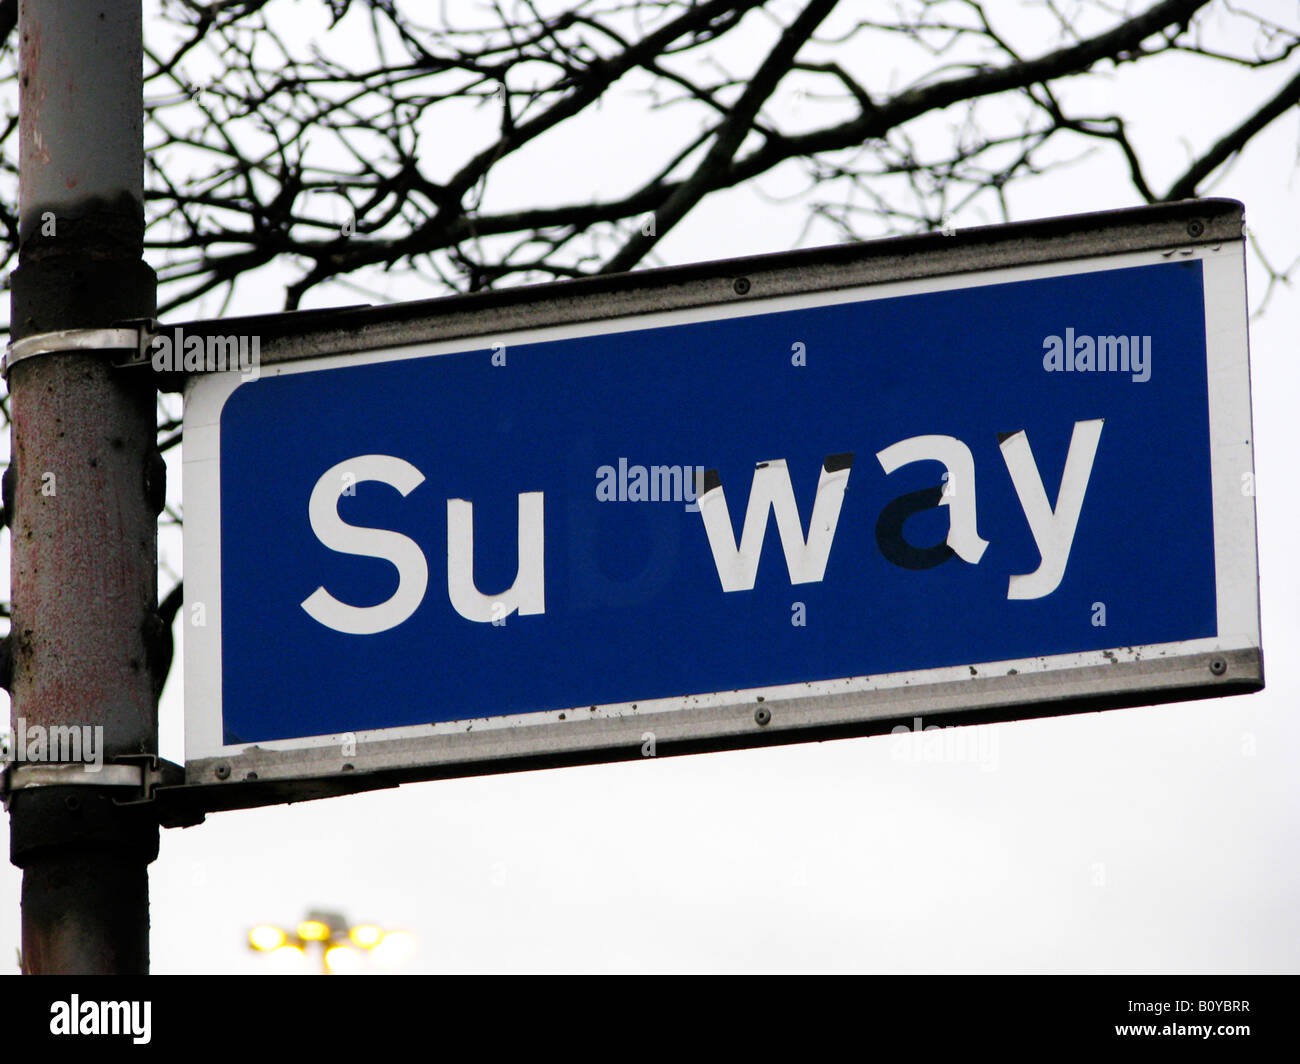 Missing Letter Stock Photos & Missing Letter Stock Images - Alamy